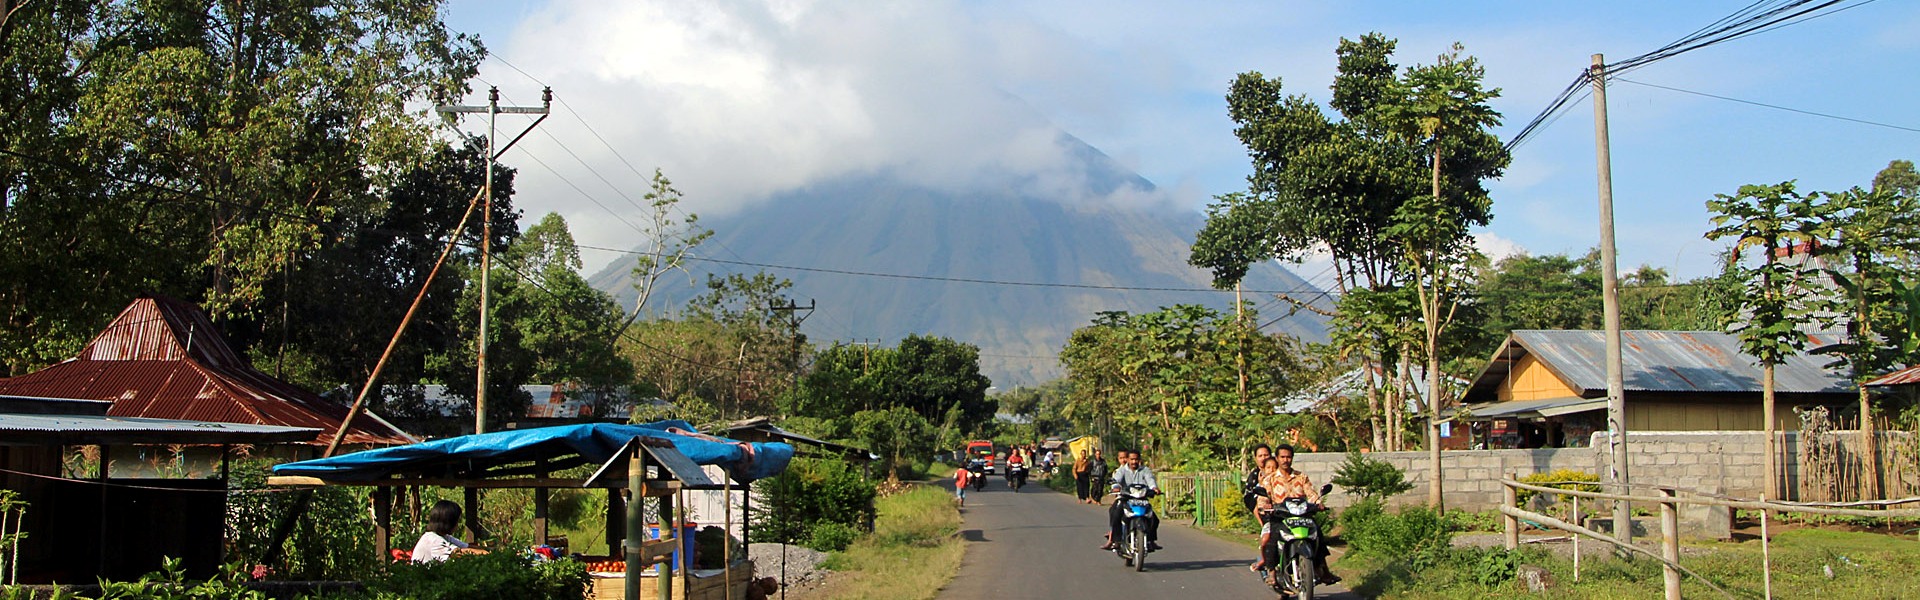 Locals live in the shadow of active Mt Inerie volcano, central , Indonesia